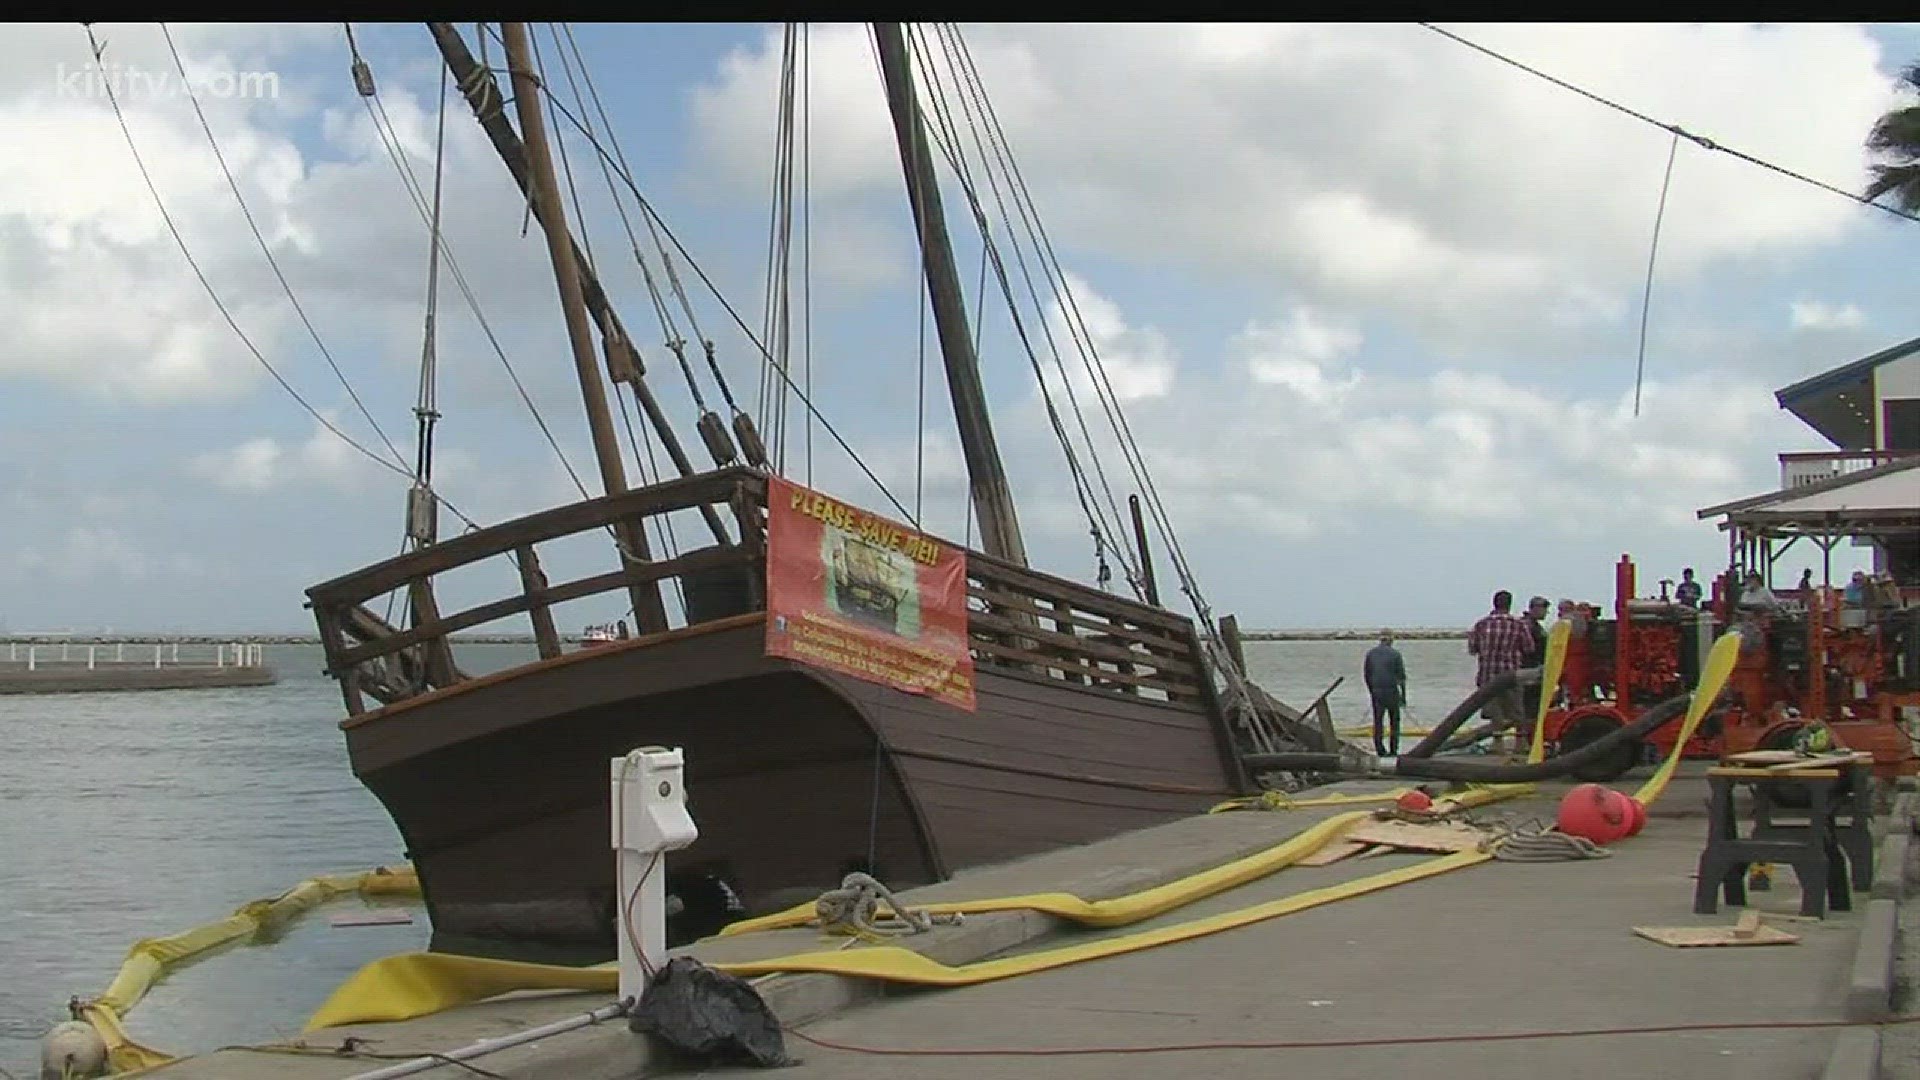 The Columbus ship replica La Ni�a has sat partially sunk at the Corpus Christi Marina since the Monday after Hurricane Harvey made landfall earlier this year.